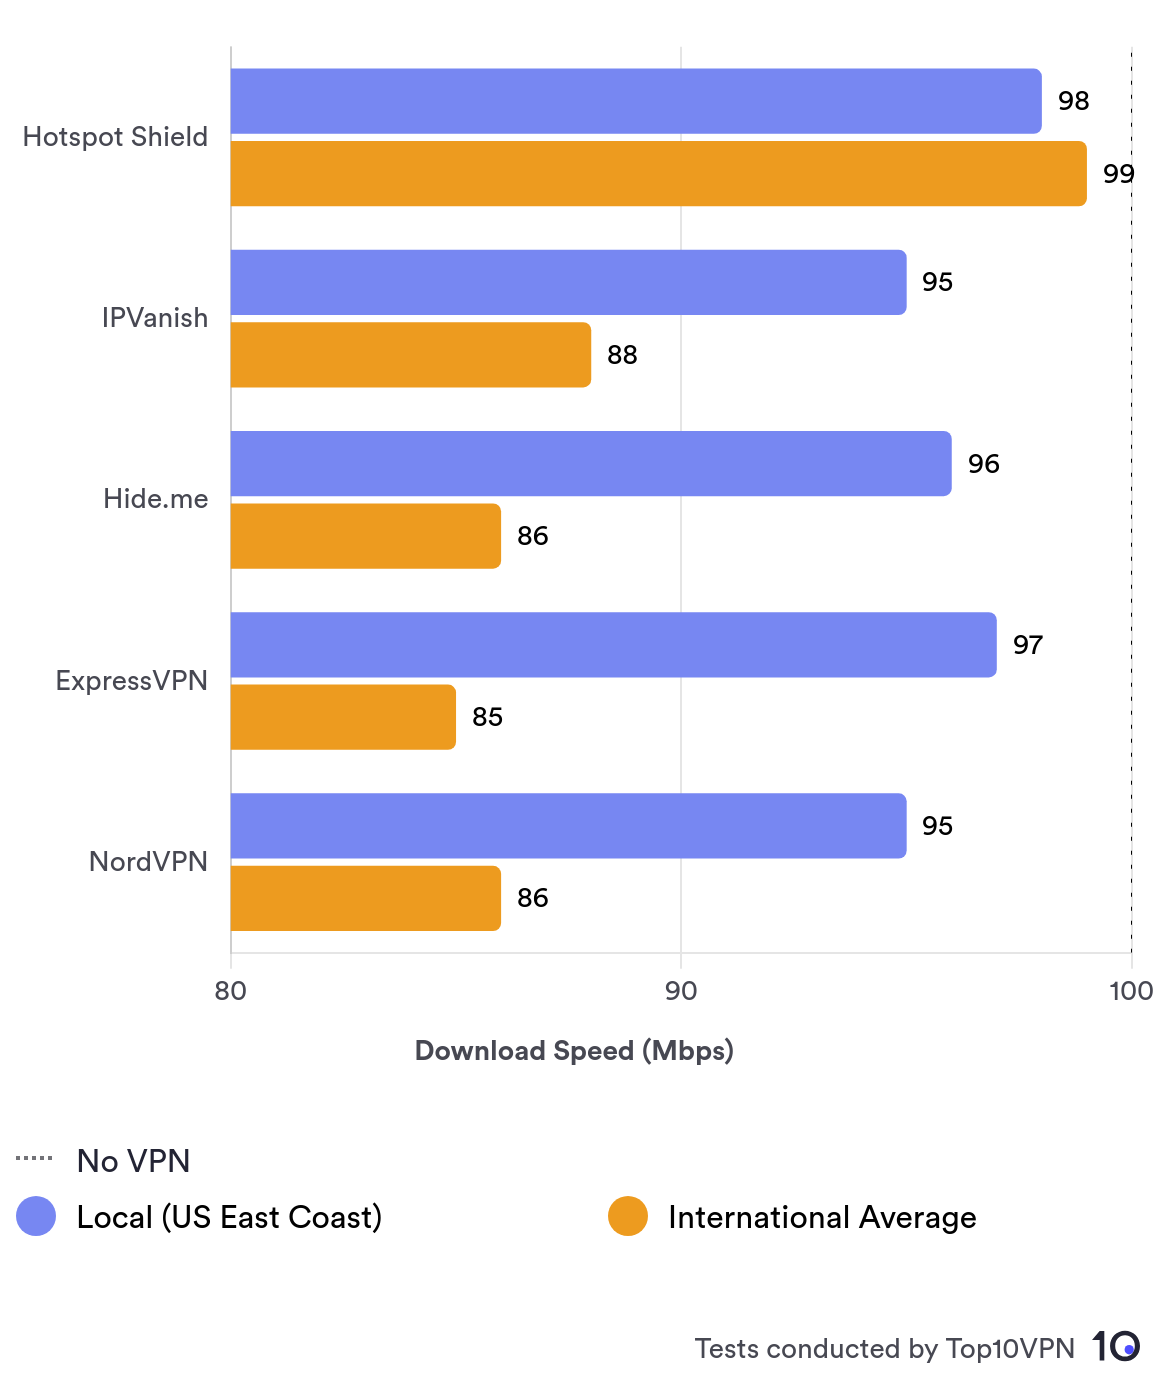 Graph showing the speed test results of the 5 fastest VPNs